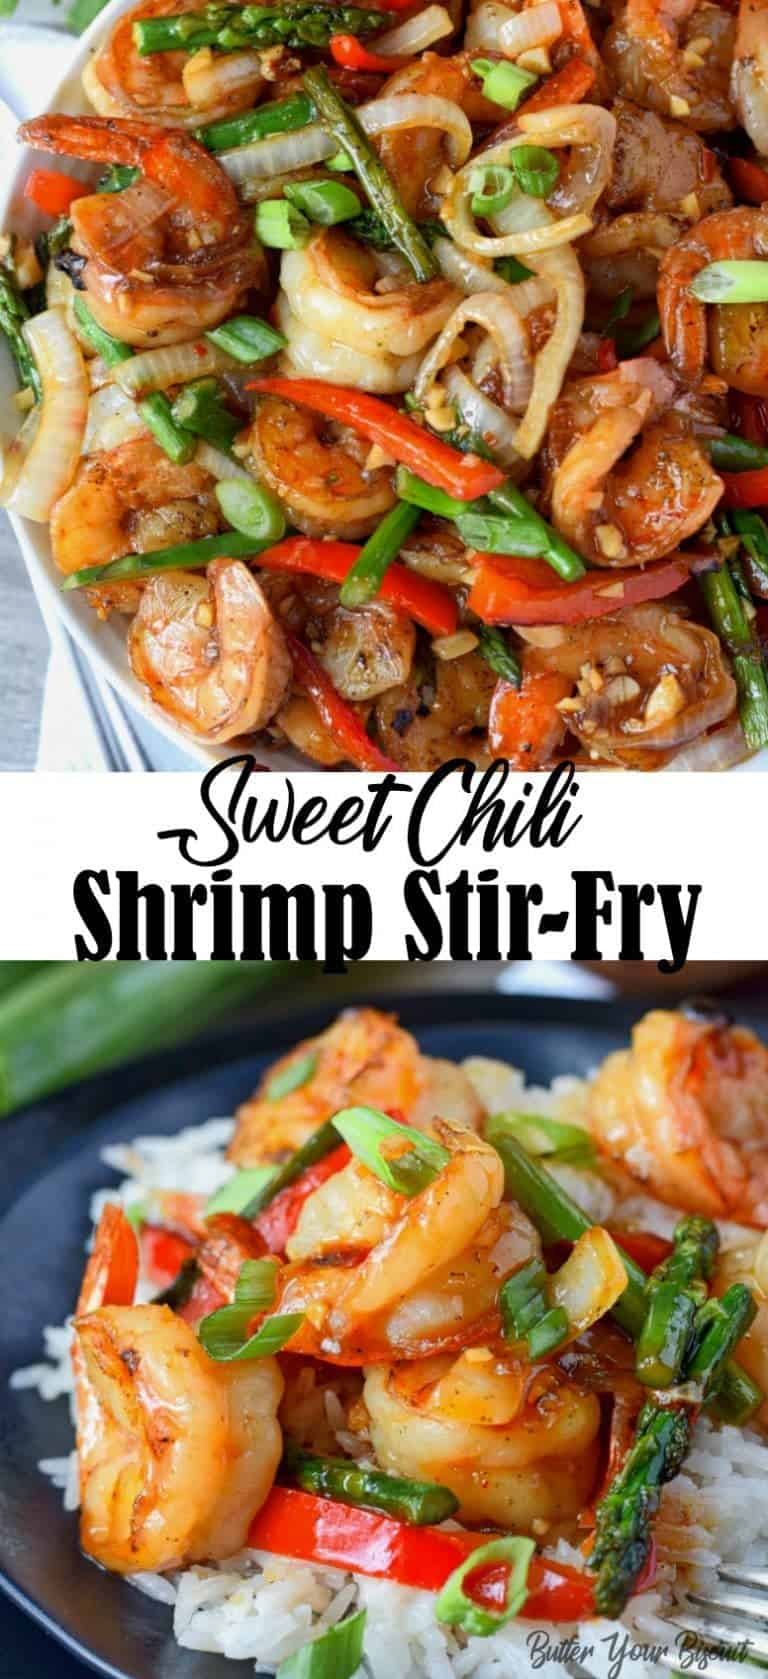 Sweet Chili Shrimp Stir Fry Easy Recipe - Butter Your Biscuit